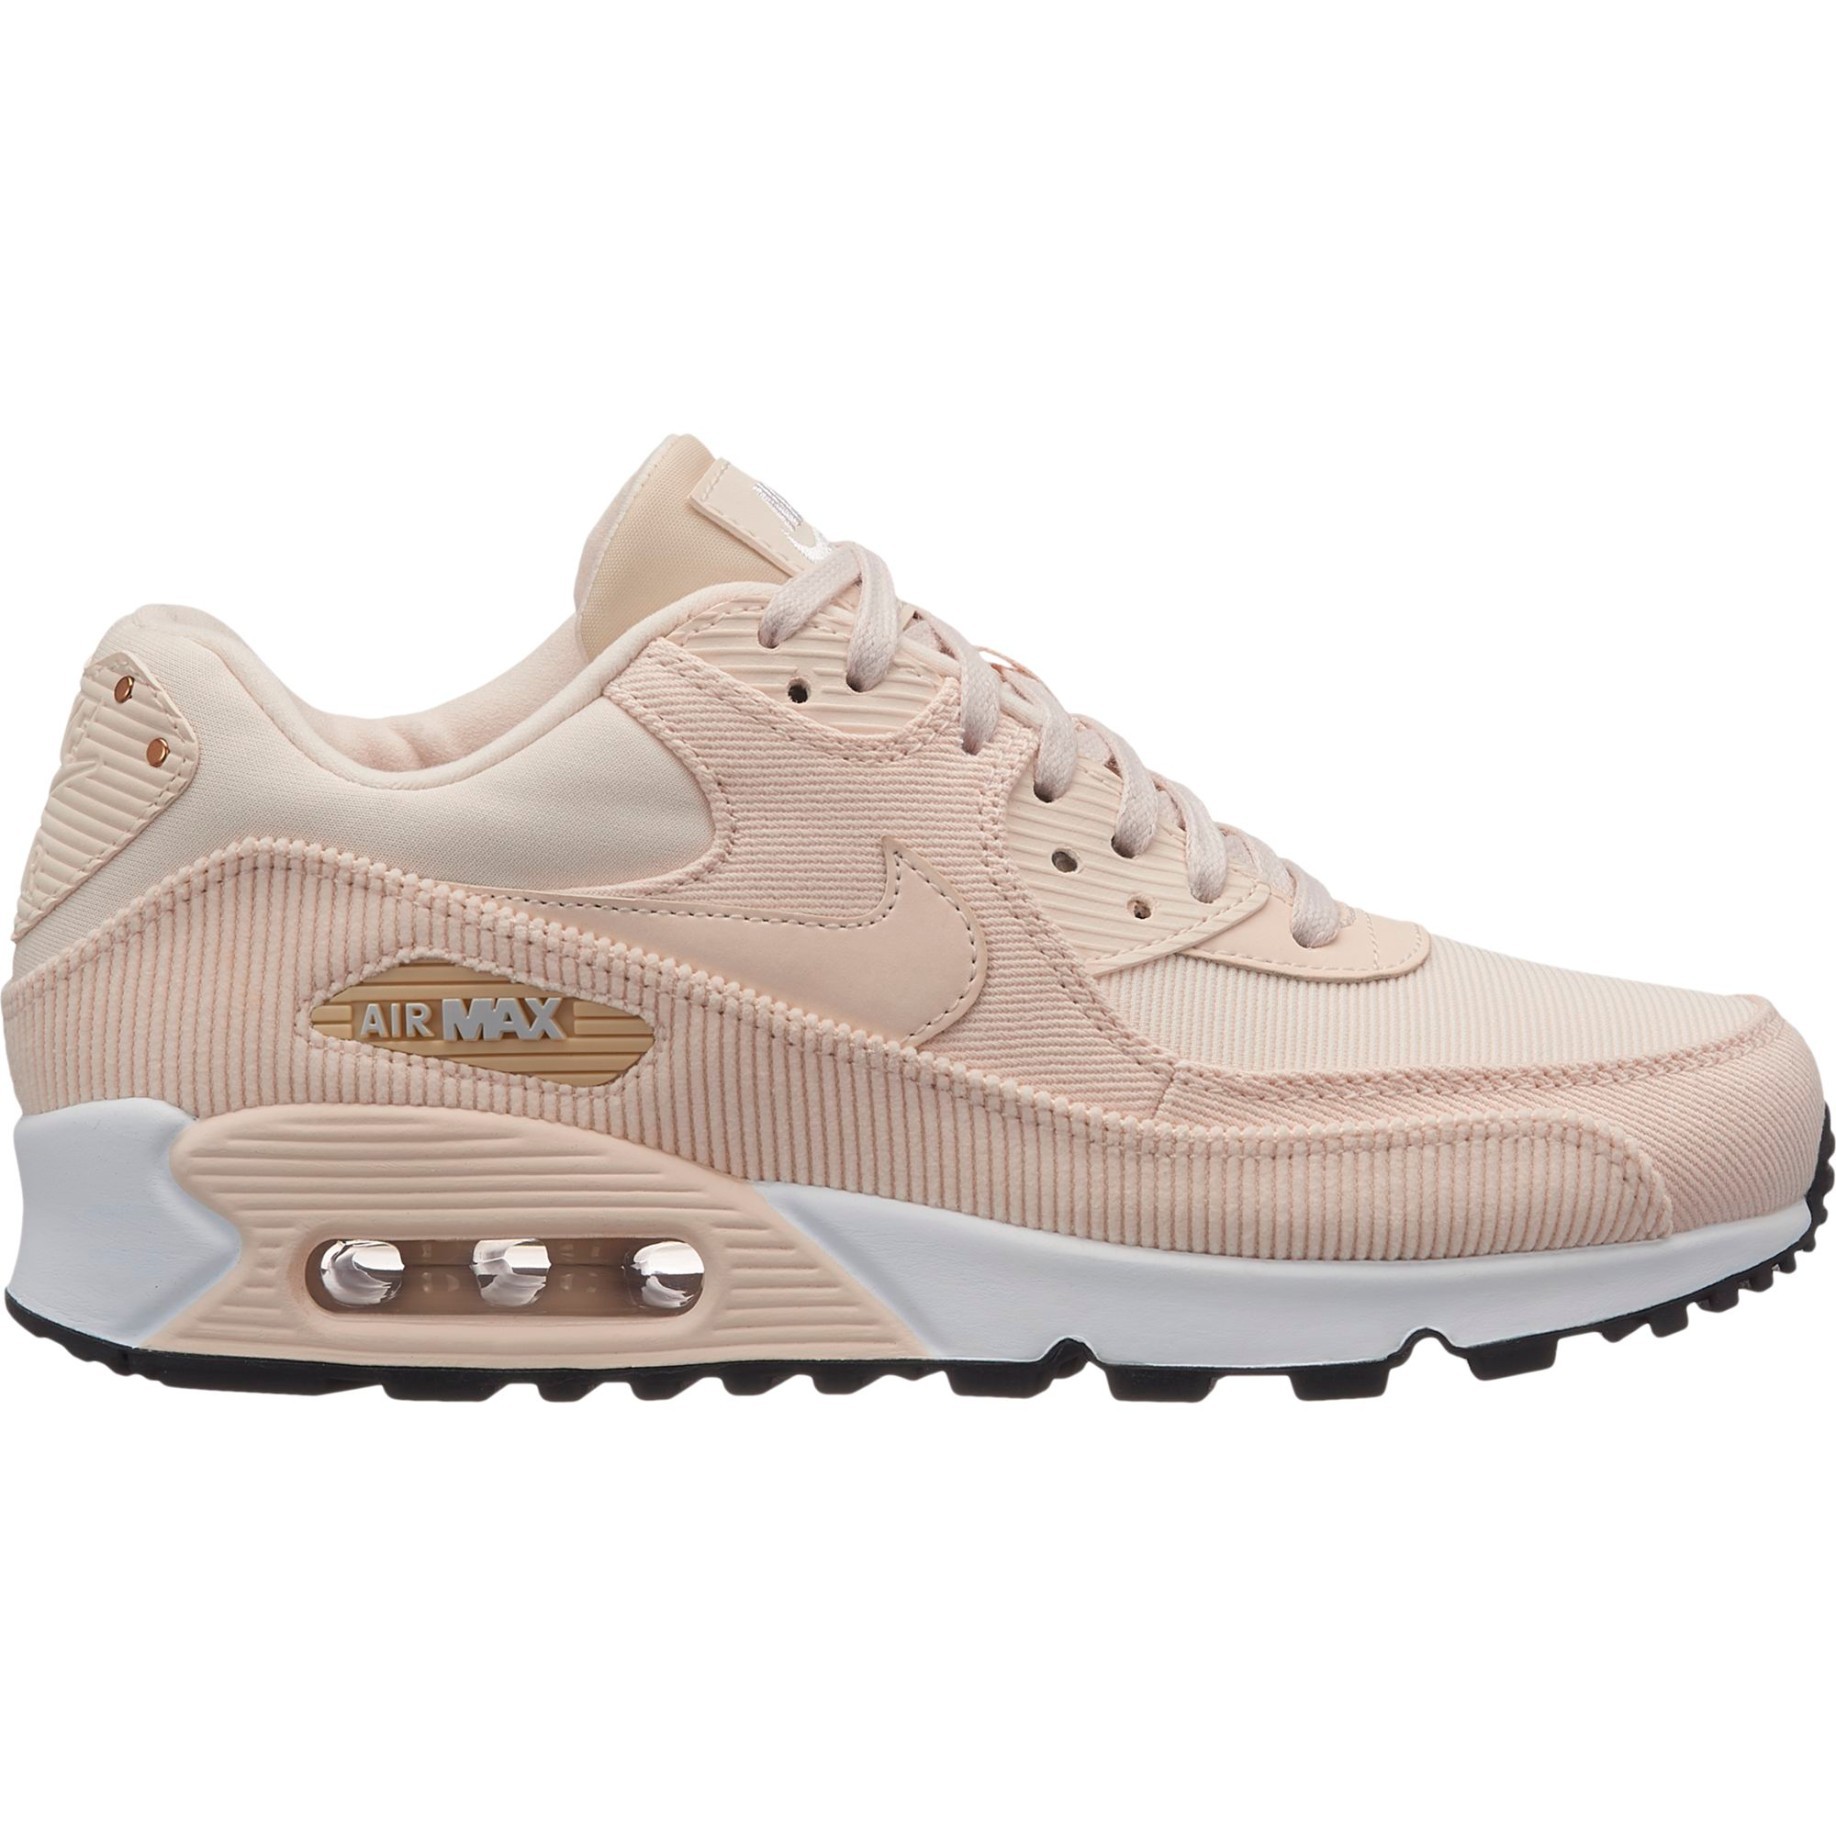 Shoes Woman Air Max 90 Leather colore Pink White - Nike - SportIT.com